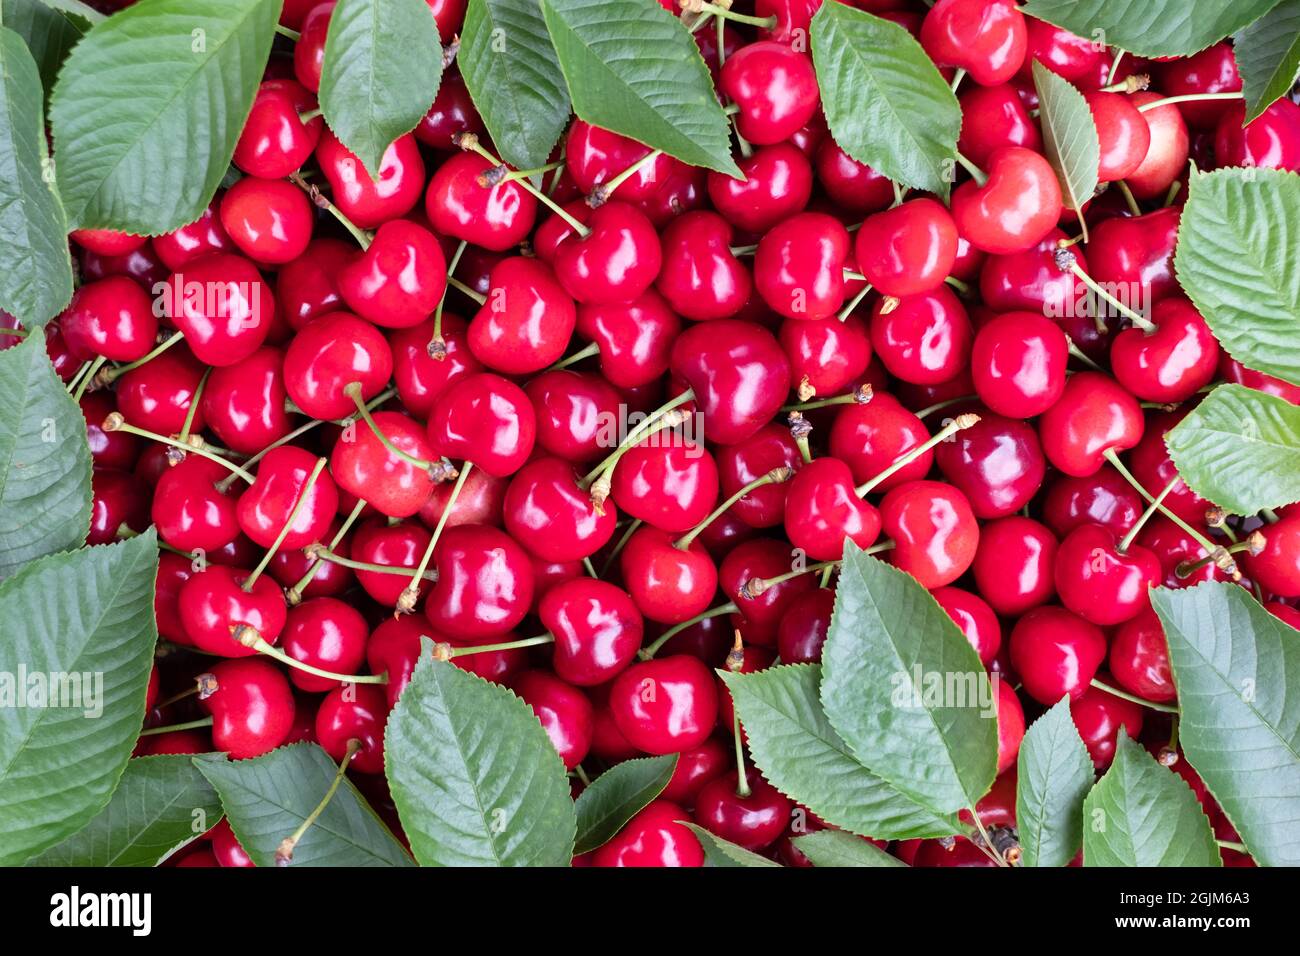 Cherry (merry) berry heap with leaves closep. Food photography Stock Photo